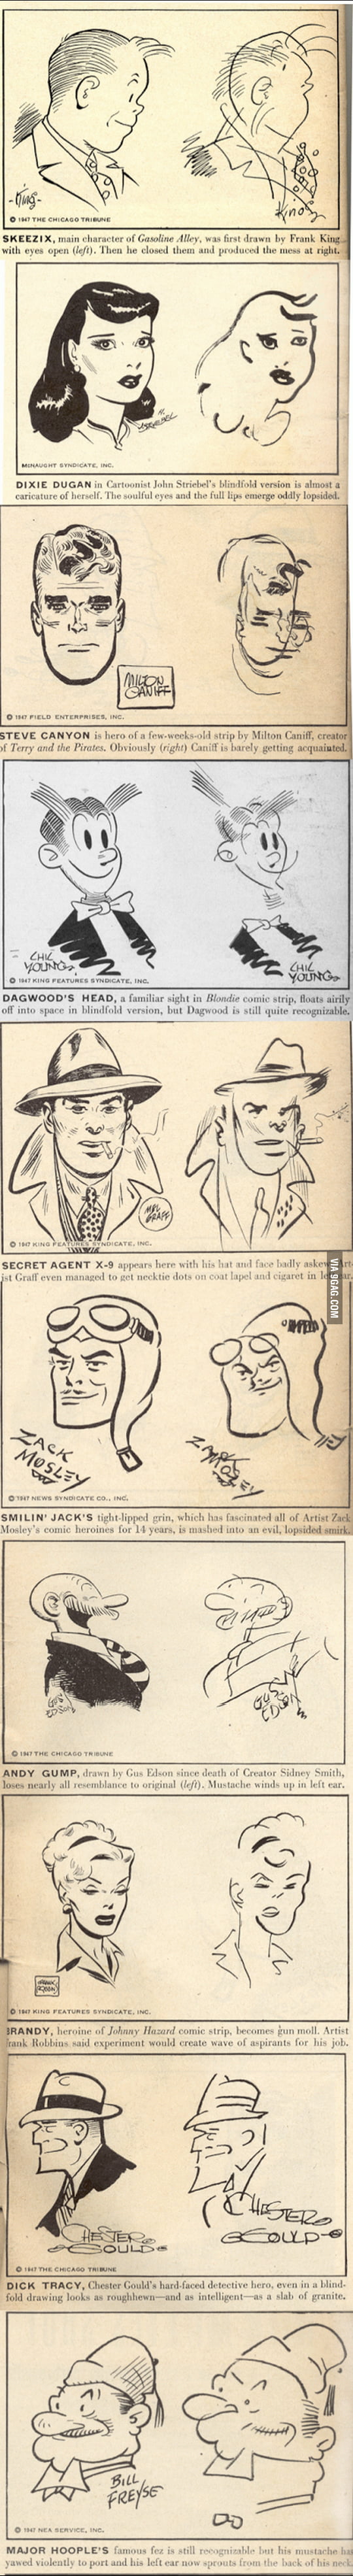 Comic strip artists from the 40's draw their characters blindfolded - 9GAG